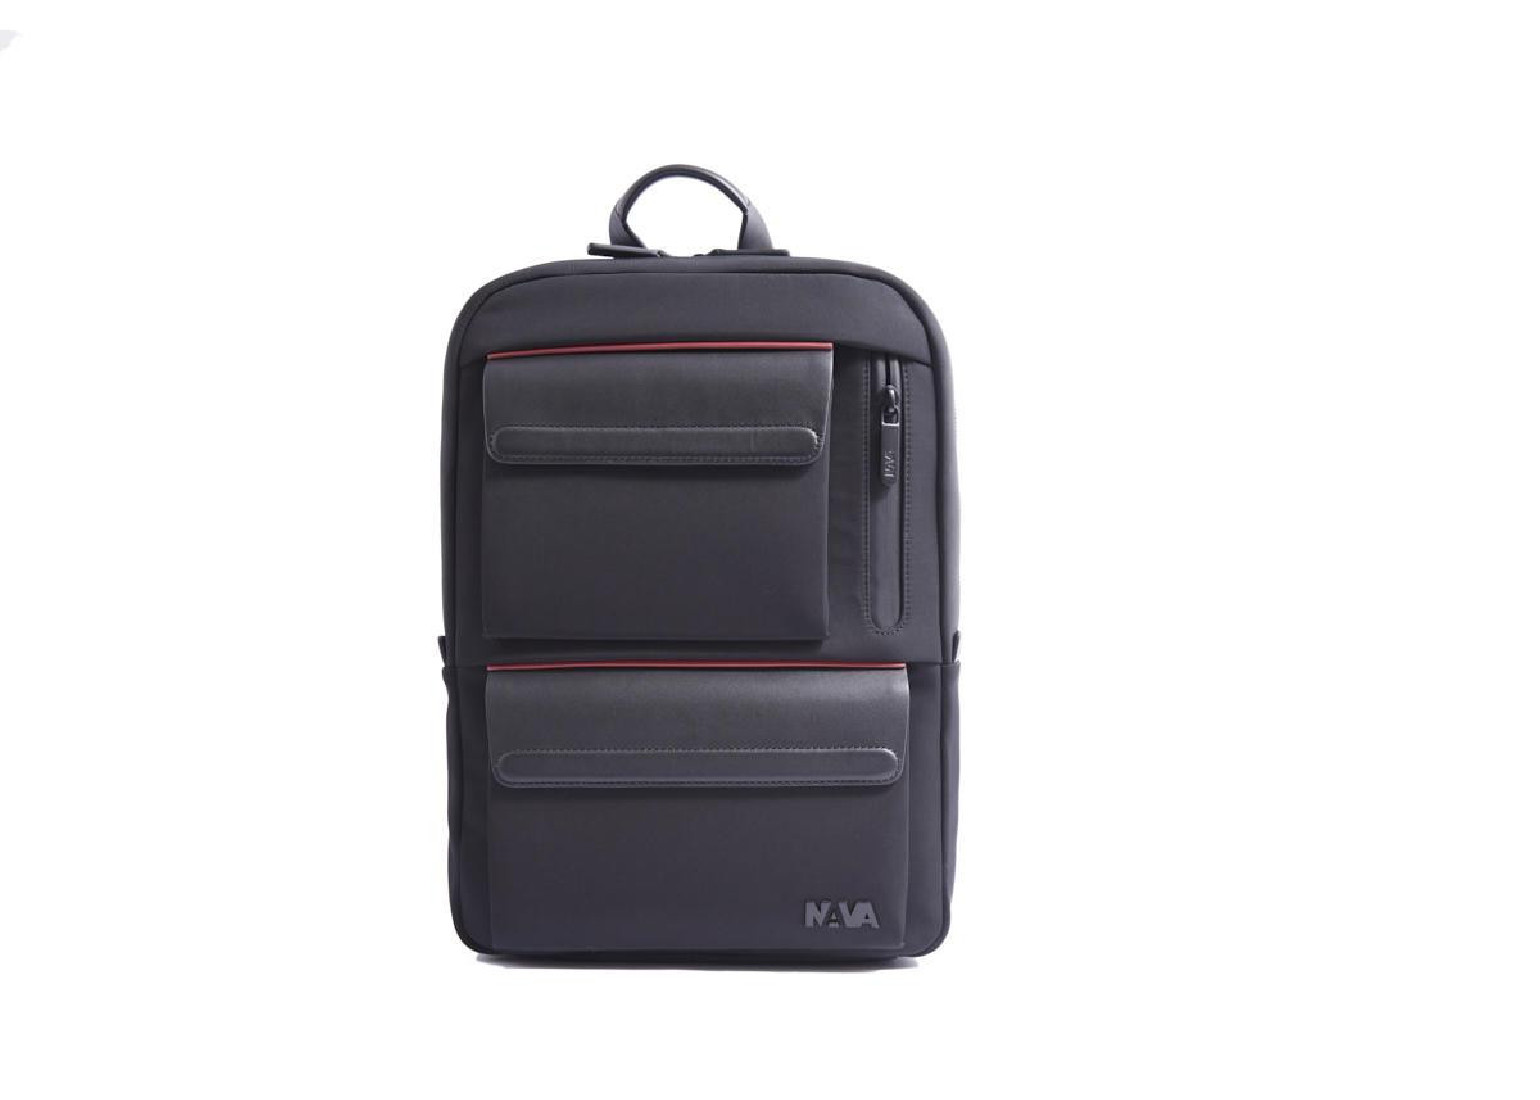 NAVA METRO ORGANIZED LEATHER BACKPACK 1 COMPARTMENTS WITH 2 FRONT POCKETS BLACK RED